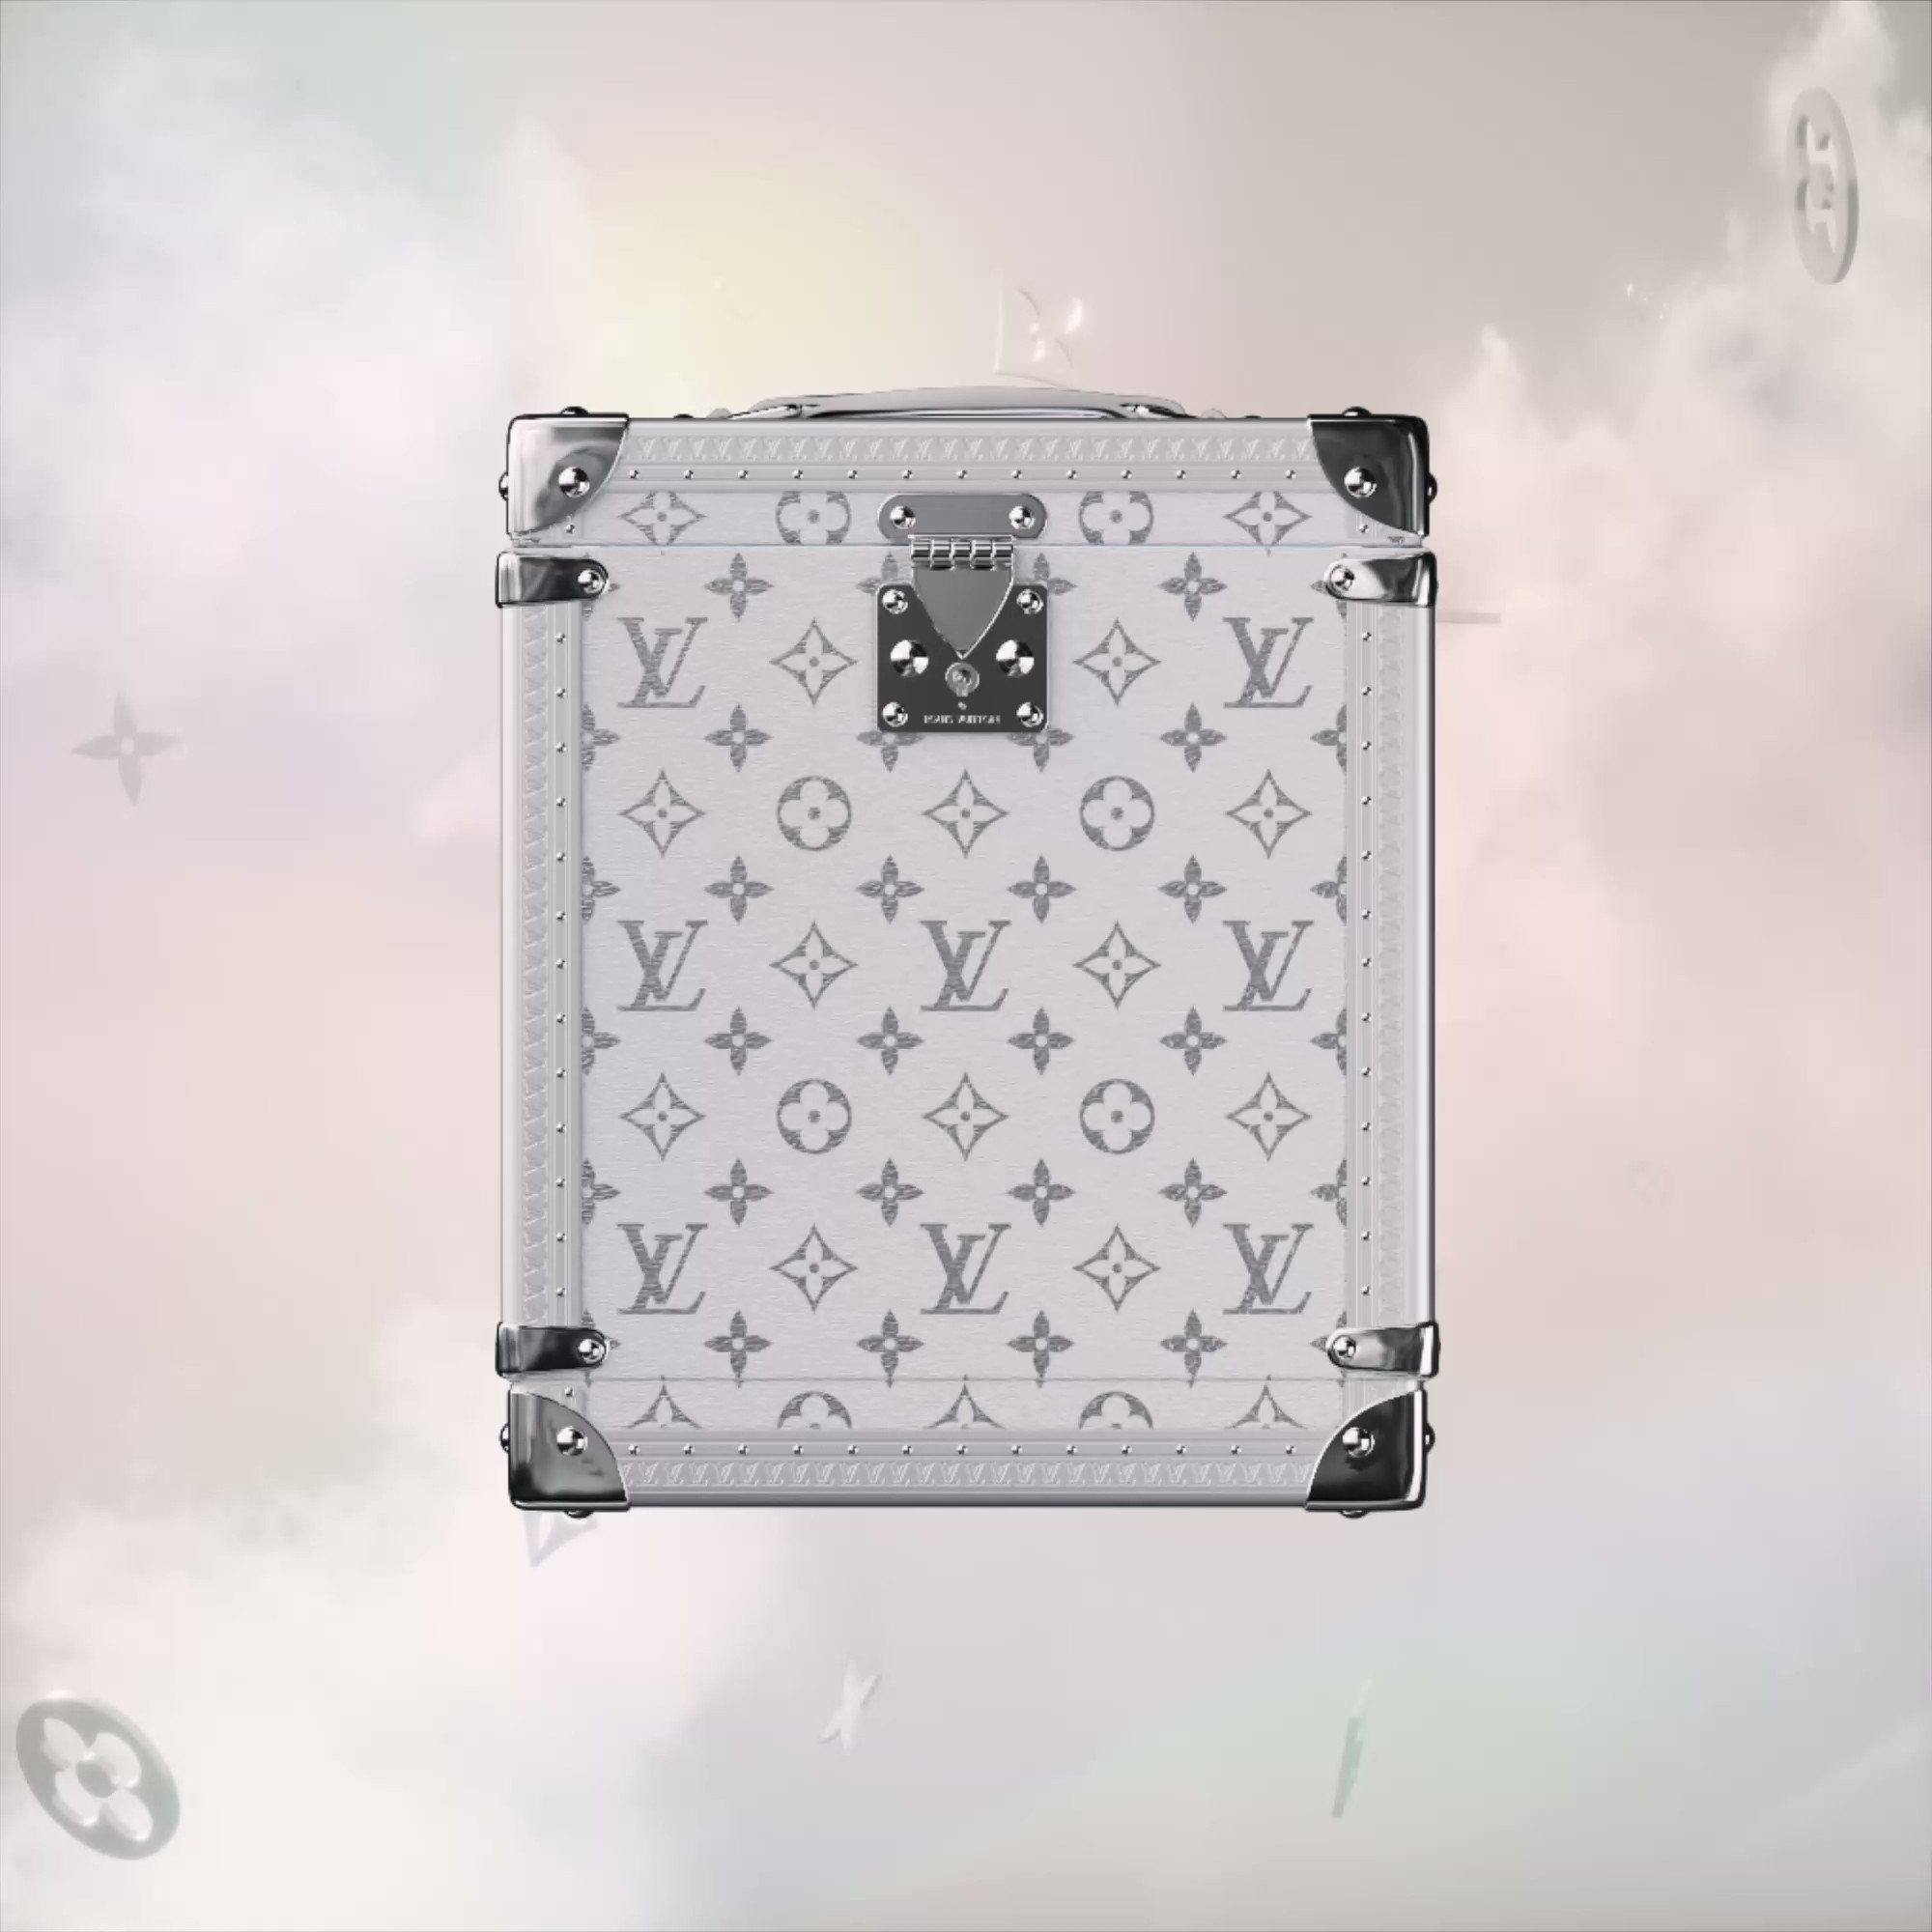 Louis Vuitton on X: VIA Treasure Trunk. The allowlist is now closed.  #LouisVuitton invites selected voyagers to take part in the sale of the VIA  Treasure Trunks on Friday, June 16th, with